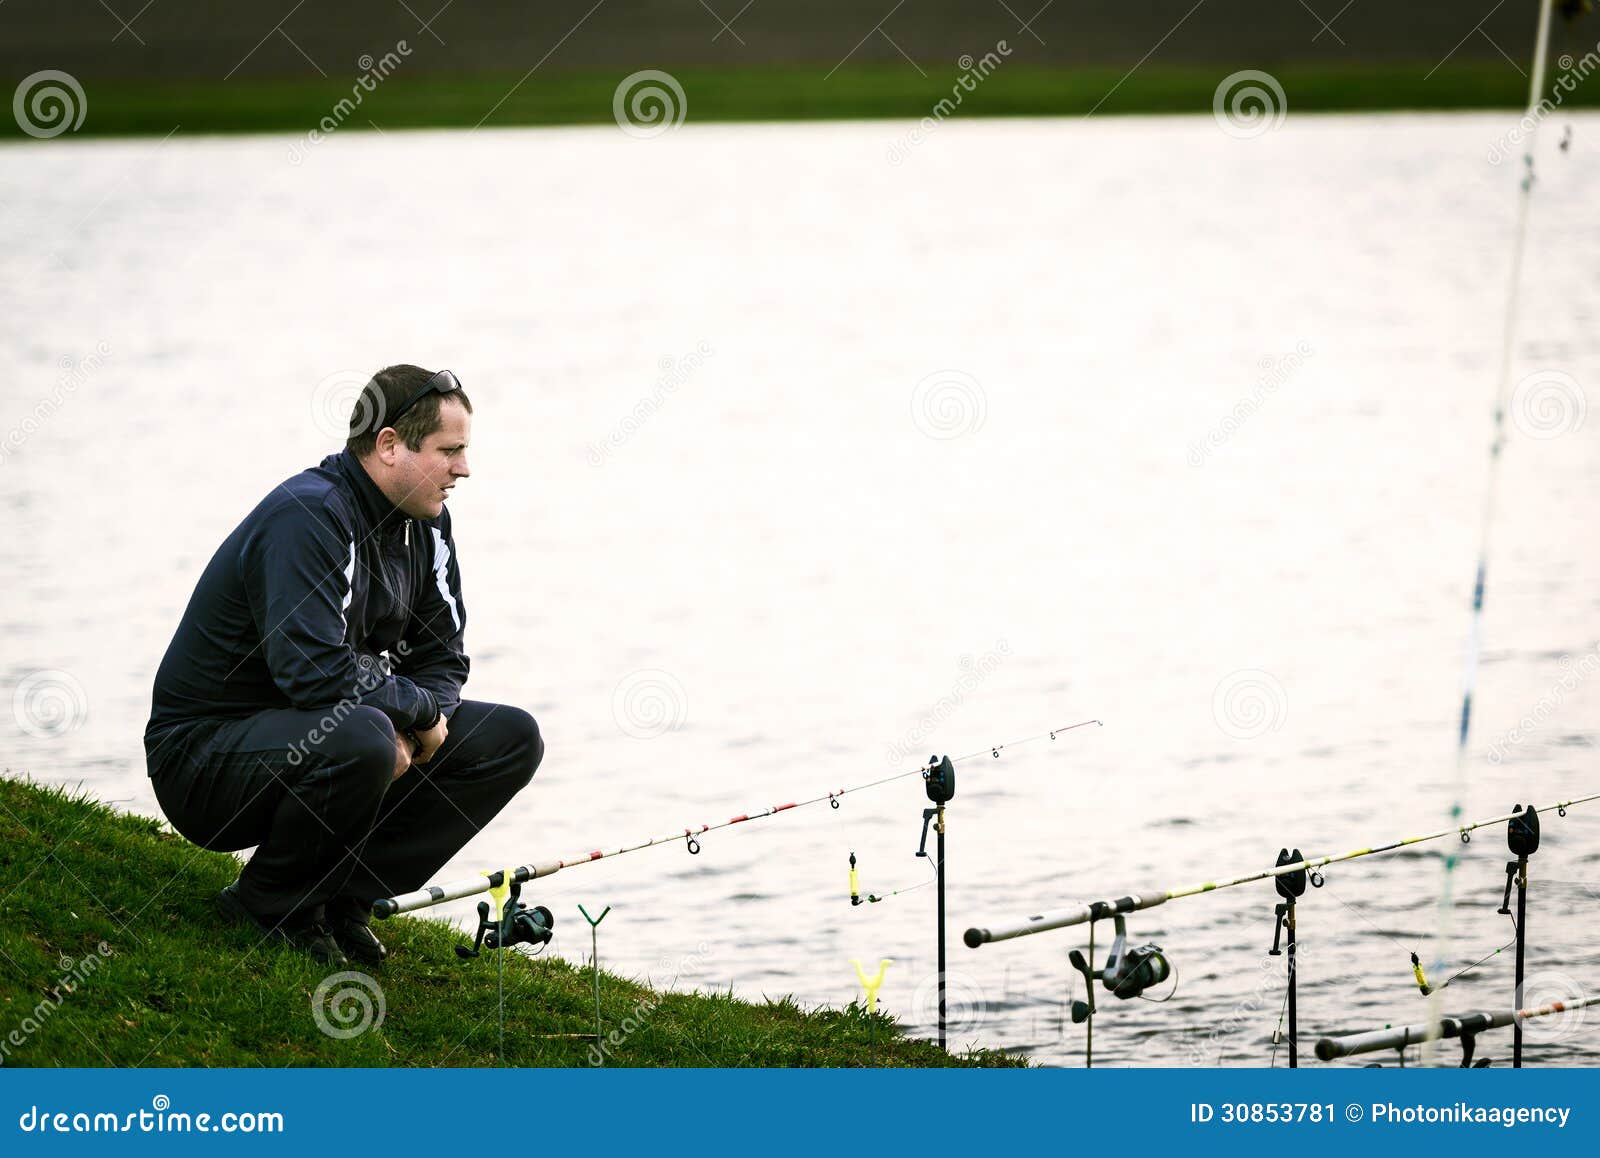 Fisherman Looking at His Rods Waiting for a Fish Stock Image